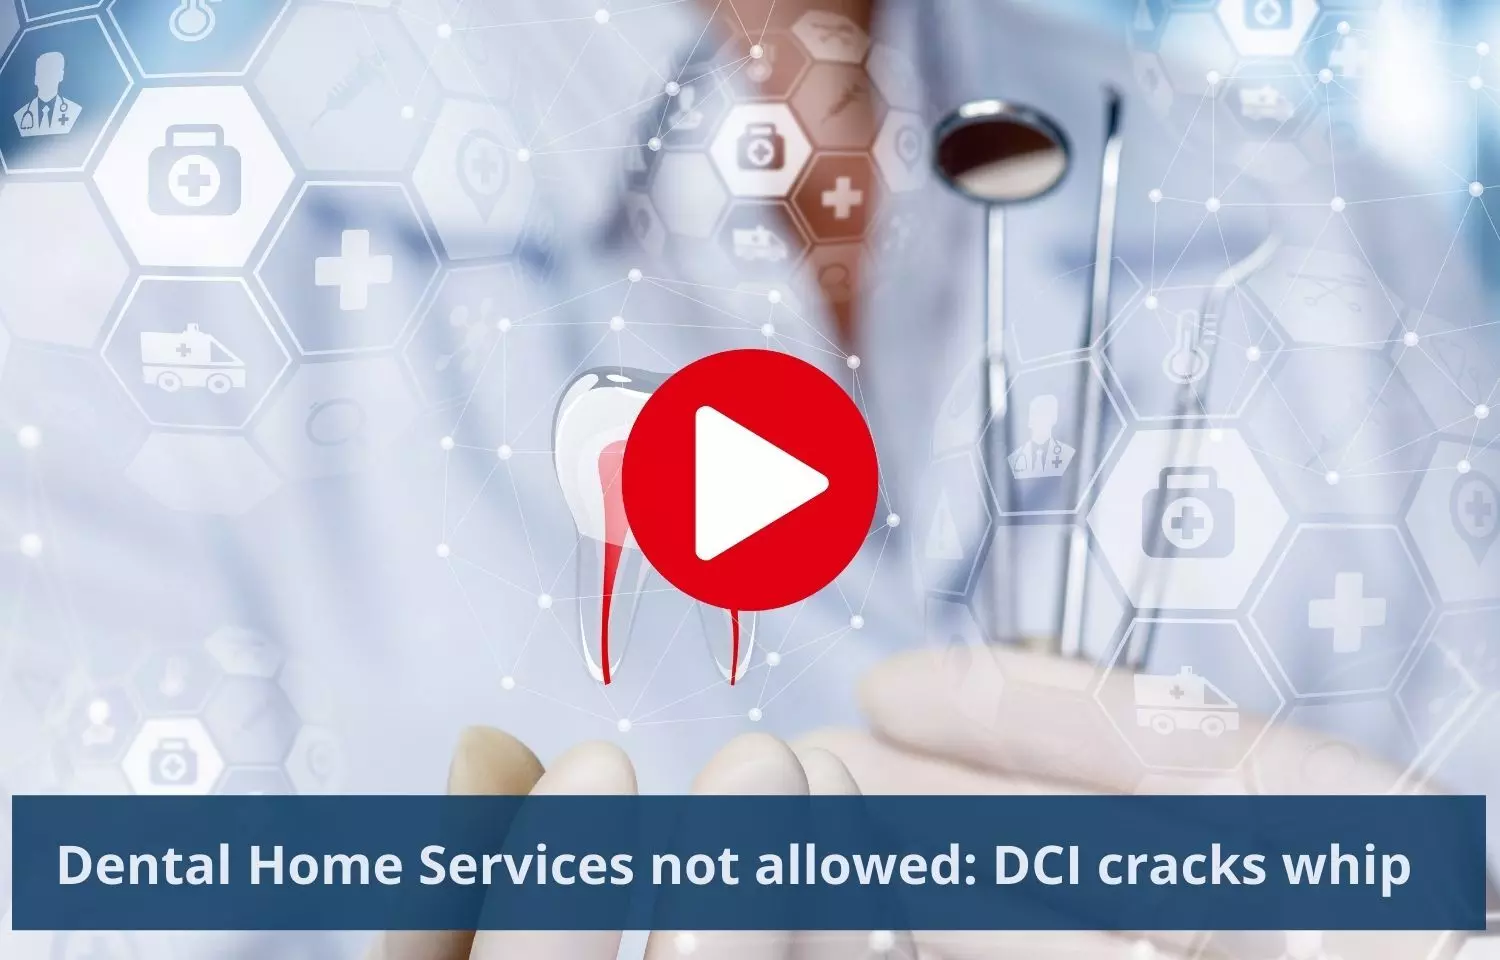 Dental home services not allowed: DCI cracks whip